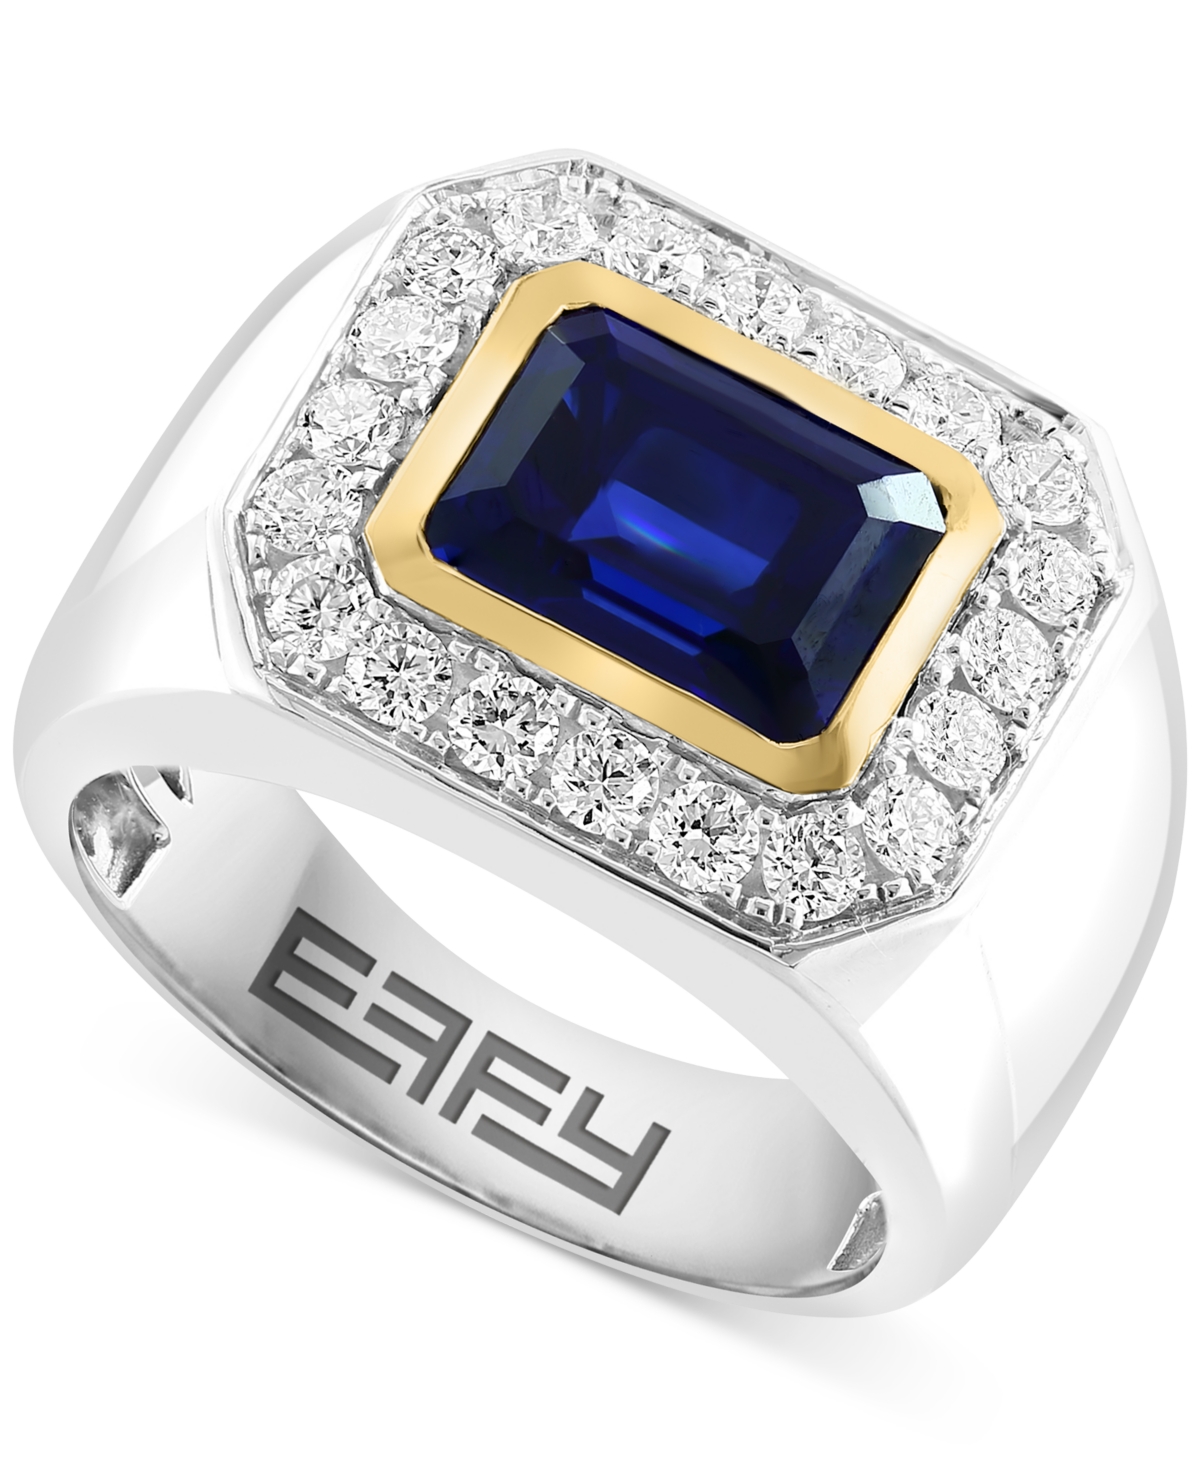 Effy Men's Lab Grown Sapphire (3-1/3 ct. t.w.) & Lab Grown Diamond (3/4 ct. t.w.) Halo Ring in 14k Two-Tone Gold - Two Tone